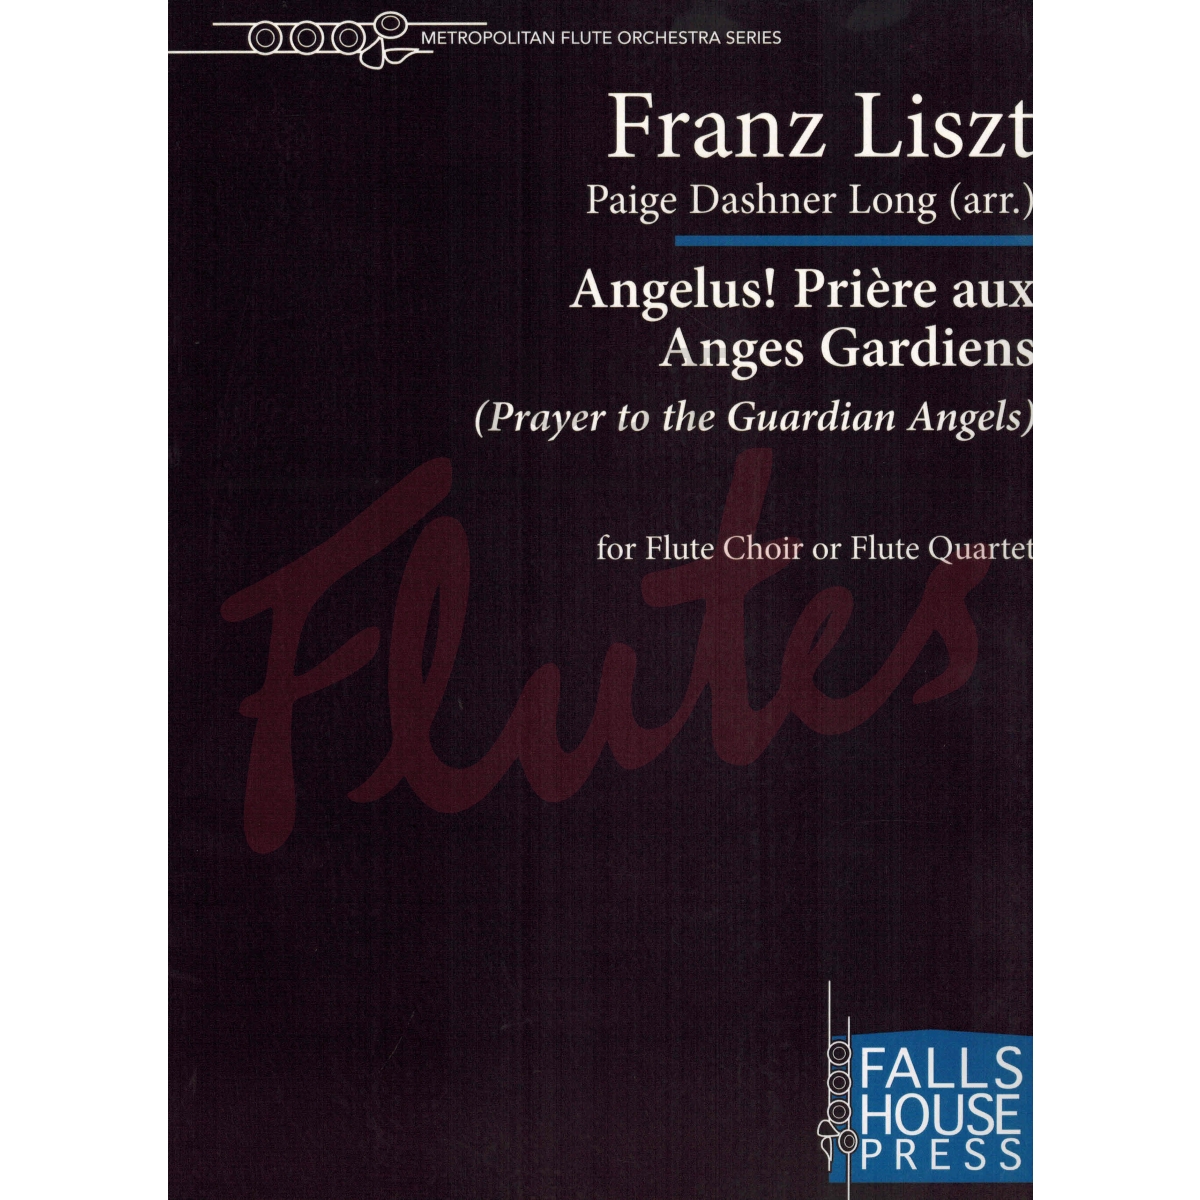 Prayer to the Guardian Angels for Four Flutes or Flute Choir